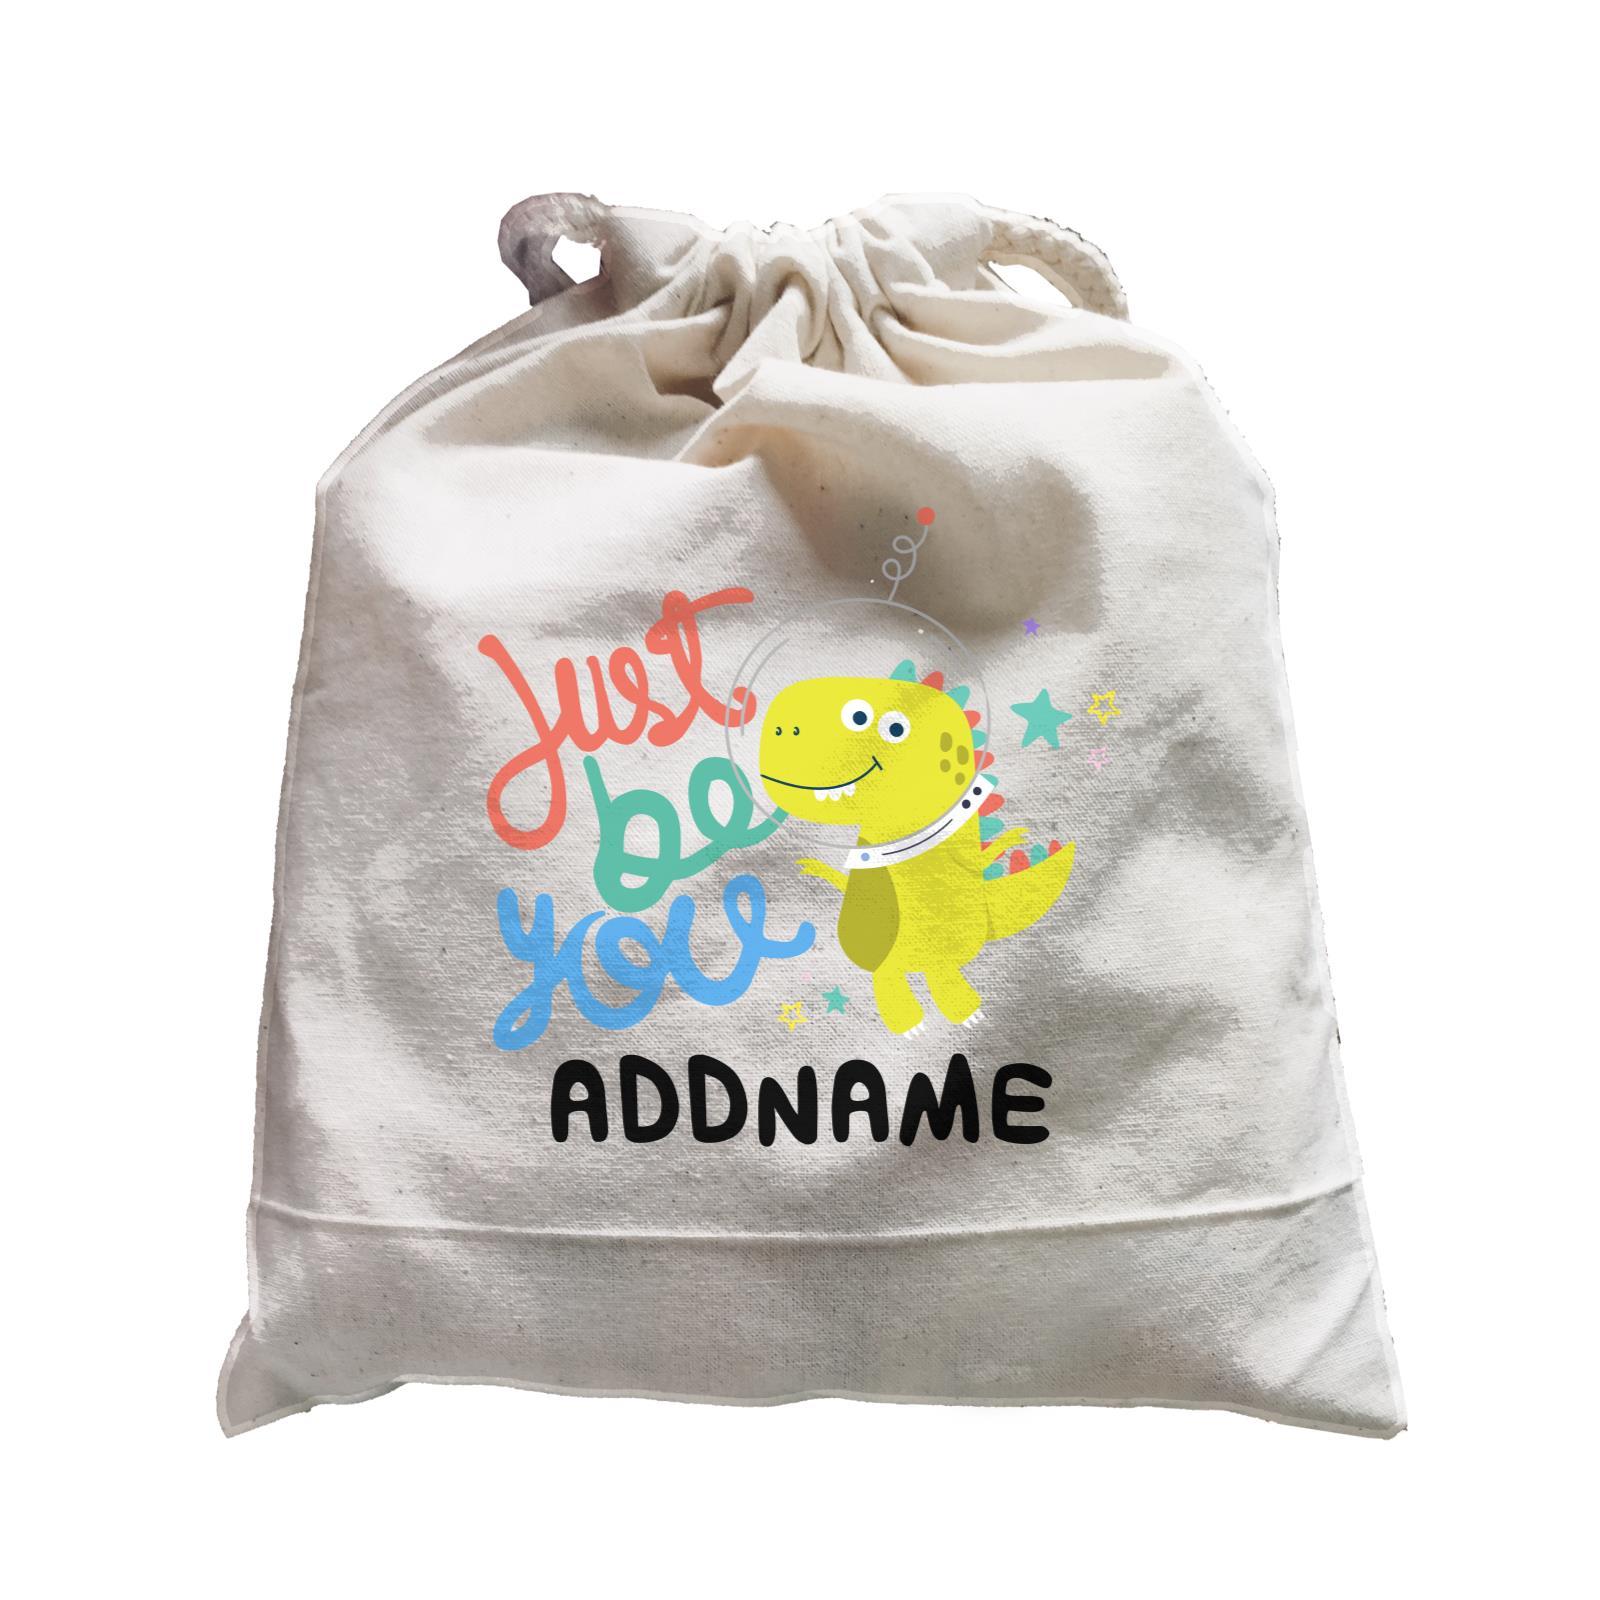 Children's Day Gift Series Just Be You Space Dinosaur Addname  Satchel